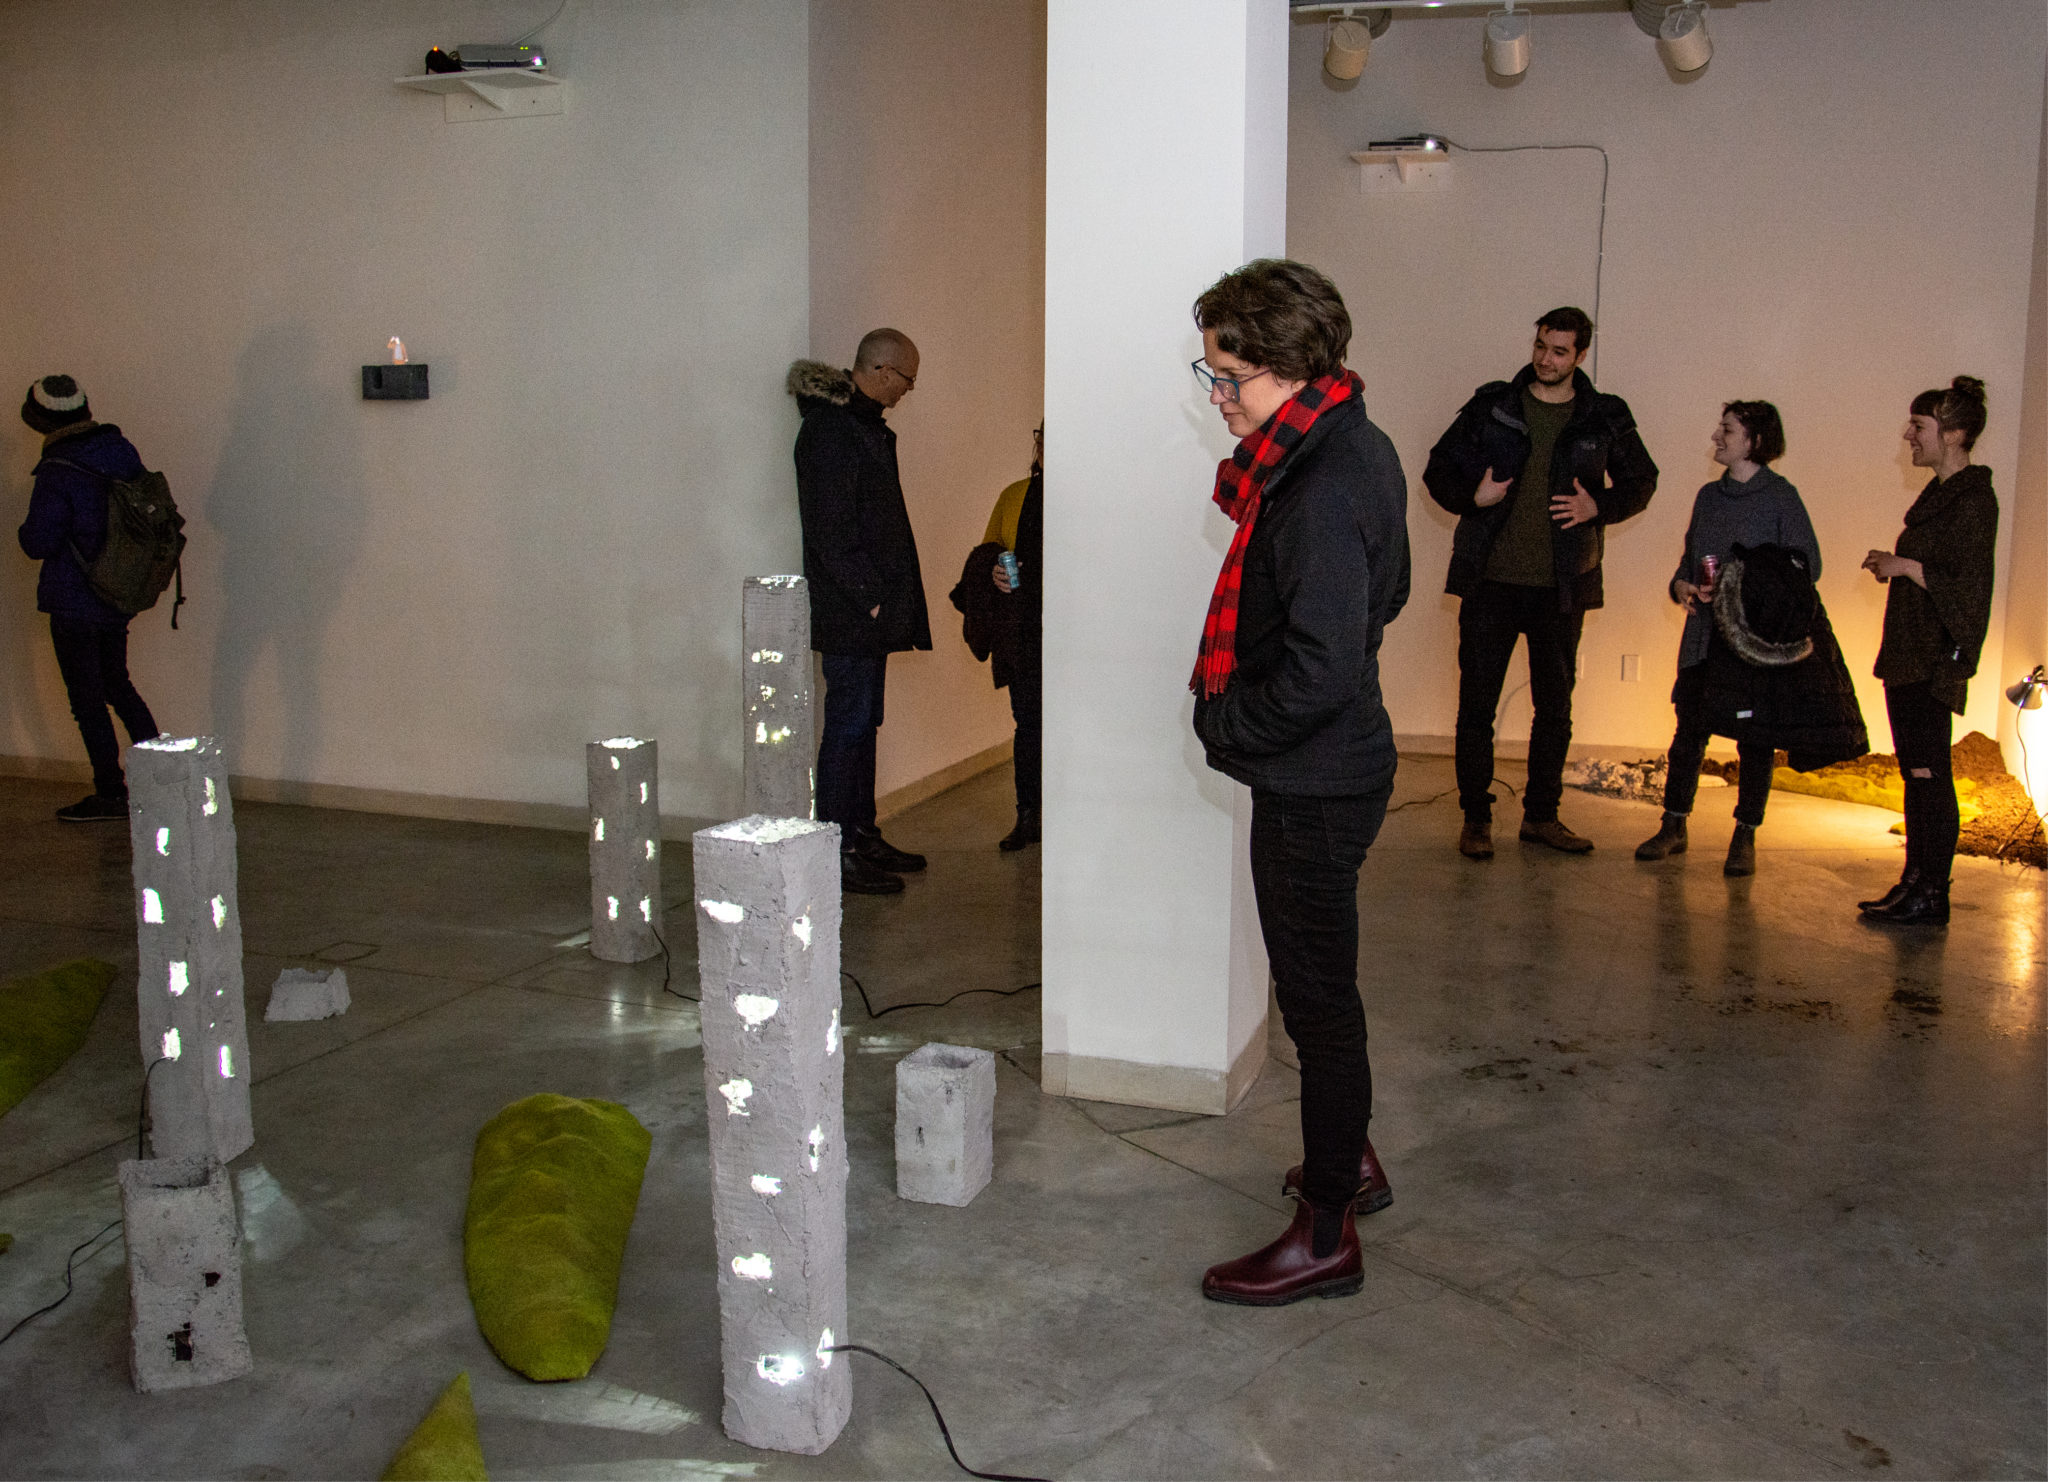 Heather Lamanno ’19 and Hallie Bahn ’19 - collaborative installation "Underpinning," at Gallery 148 at MCAD.